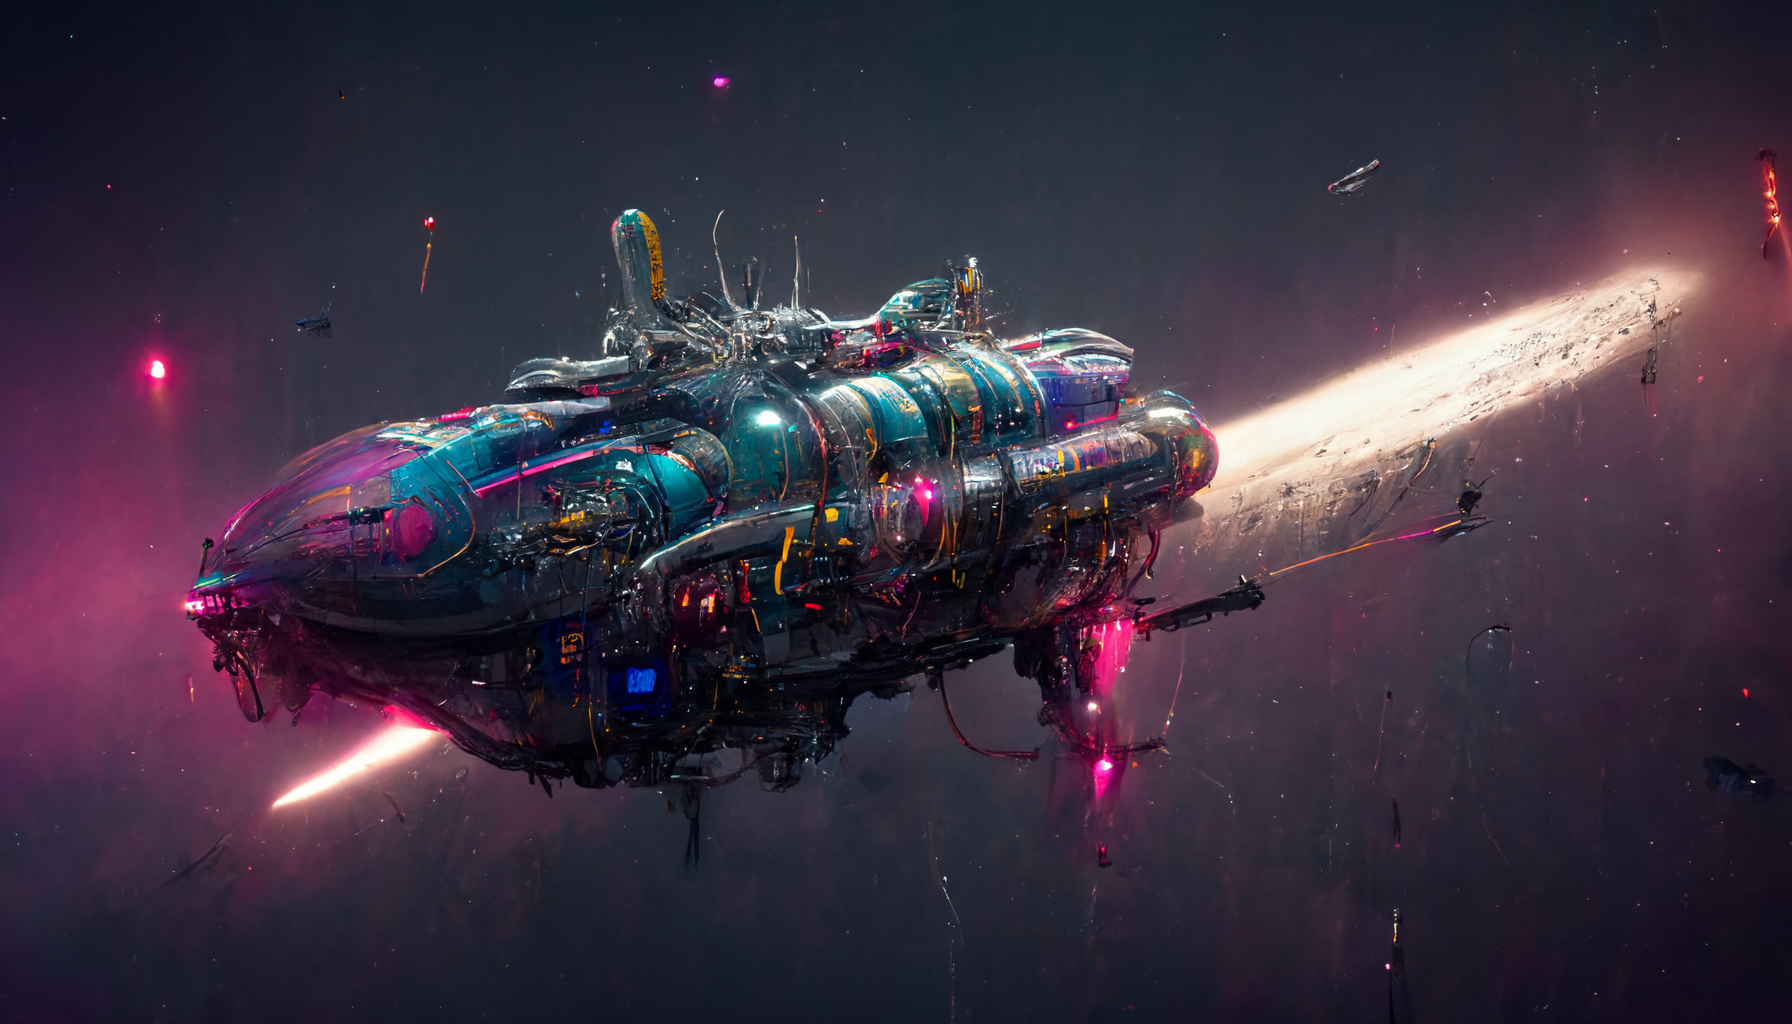 Aaron_Wacker_a_spaceship_with_cyberpunk_thrusters_and_rocketry__0898eacd-3bdd-4f90-afb9-263e7fe92f89.png